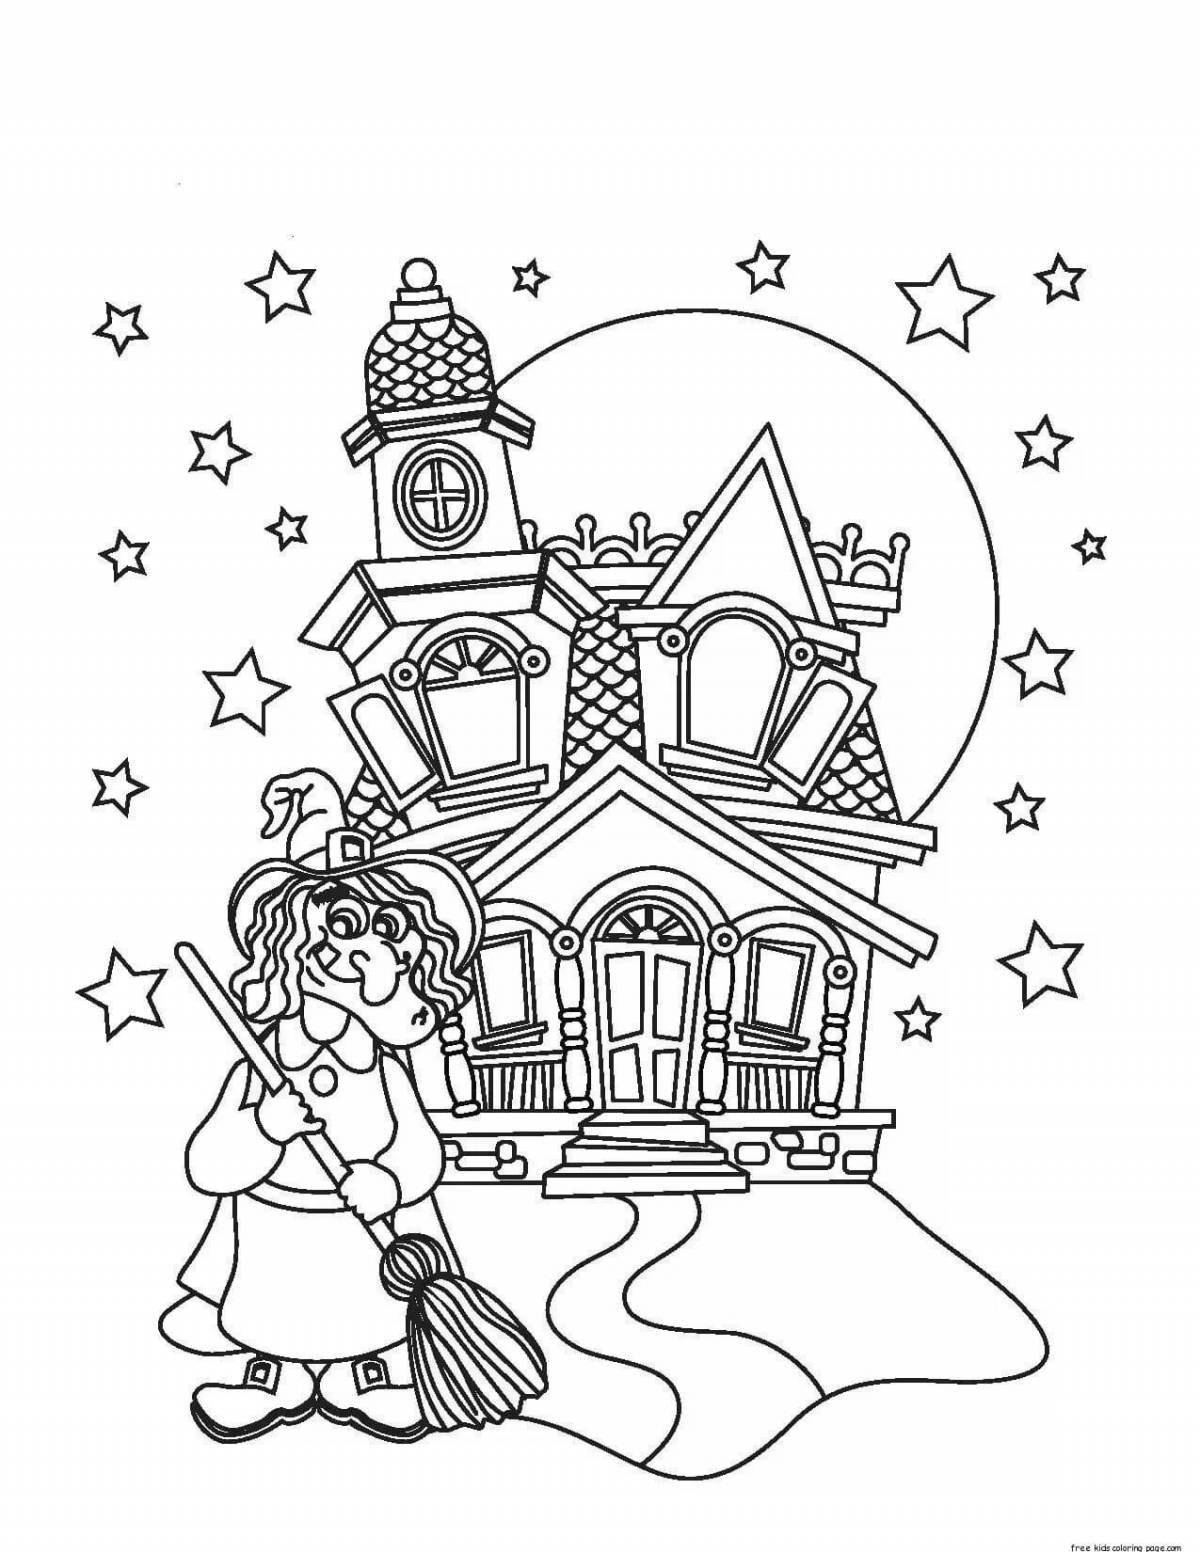 Amazing princess house coloring book